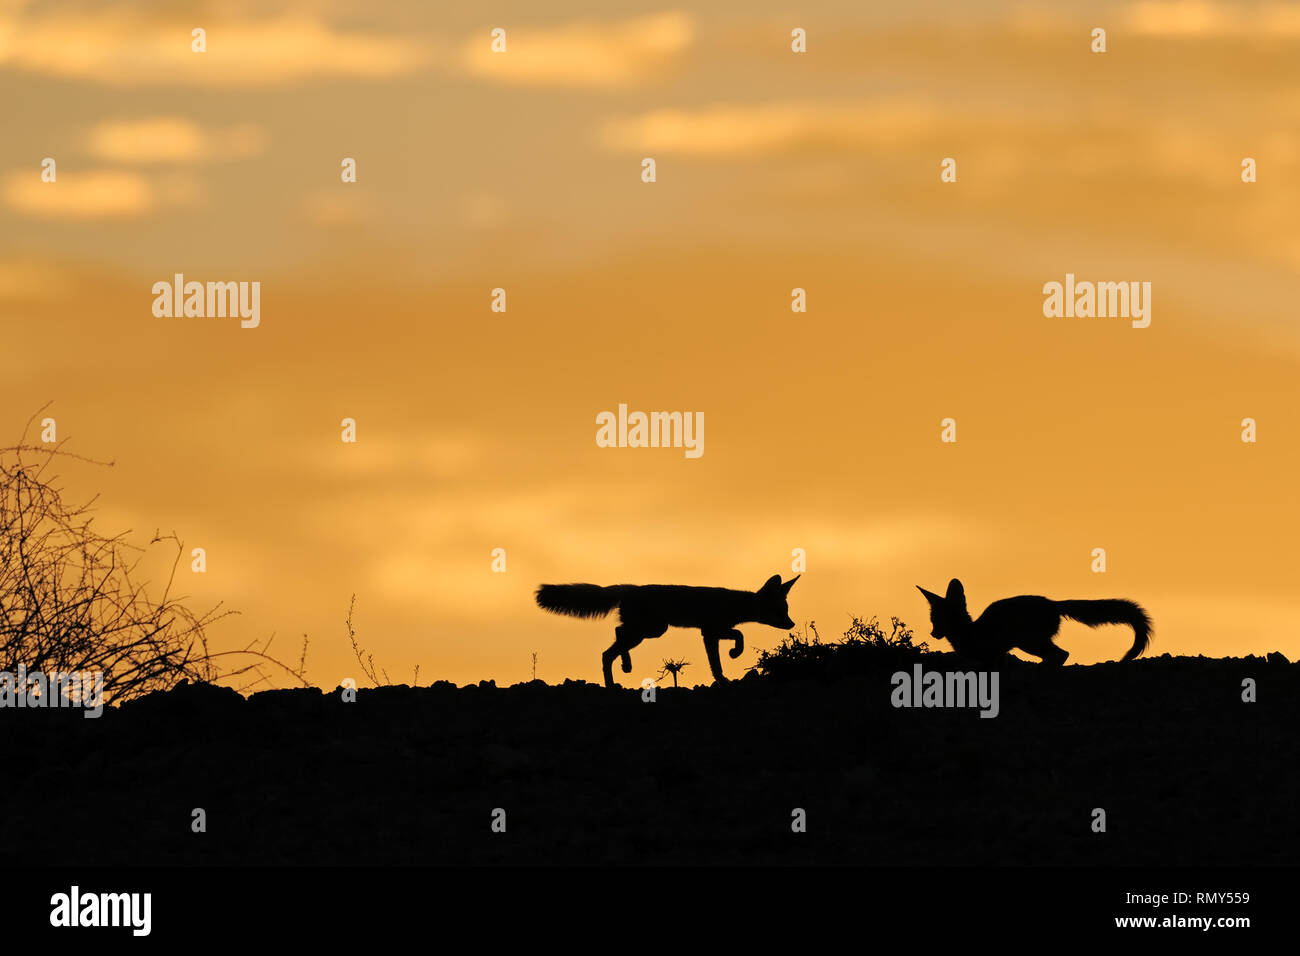 Cape foxes (Vulpes chama) silhouetted against an orange sky at sunrise, Kalahari desert, South Africa Stock Photo